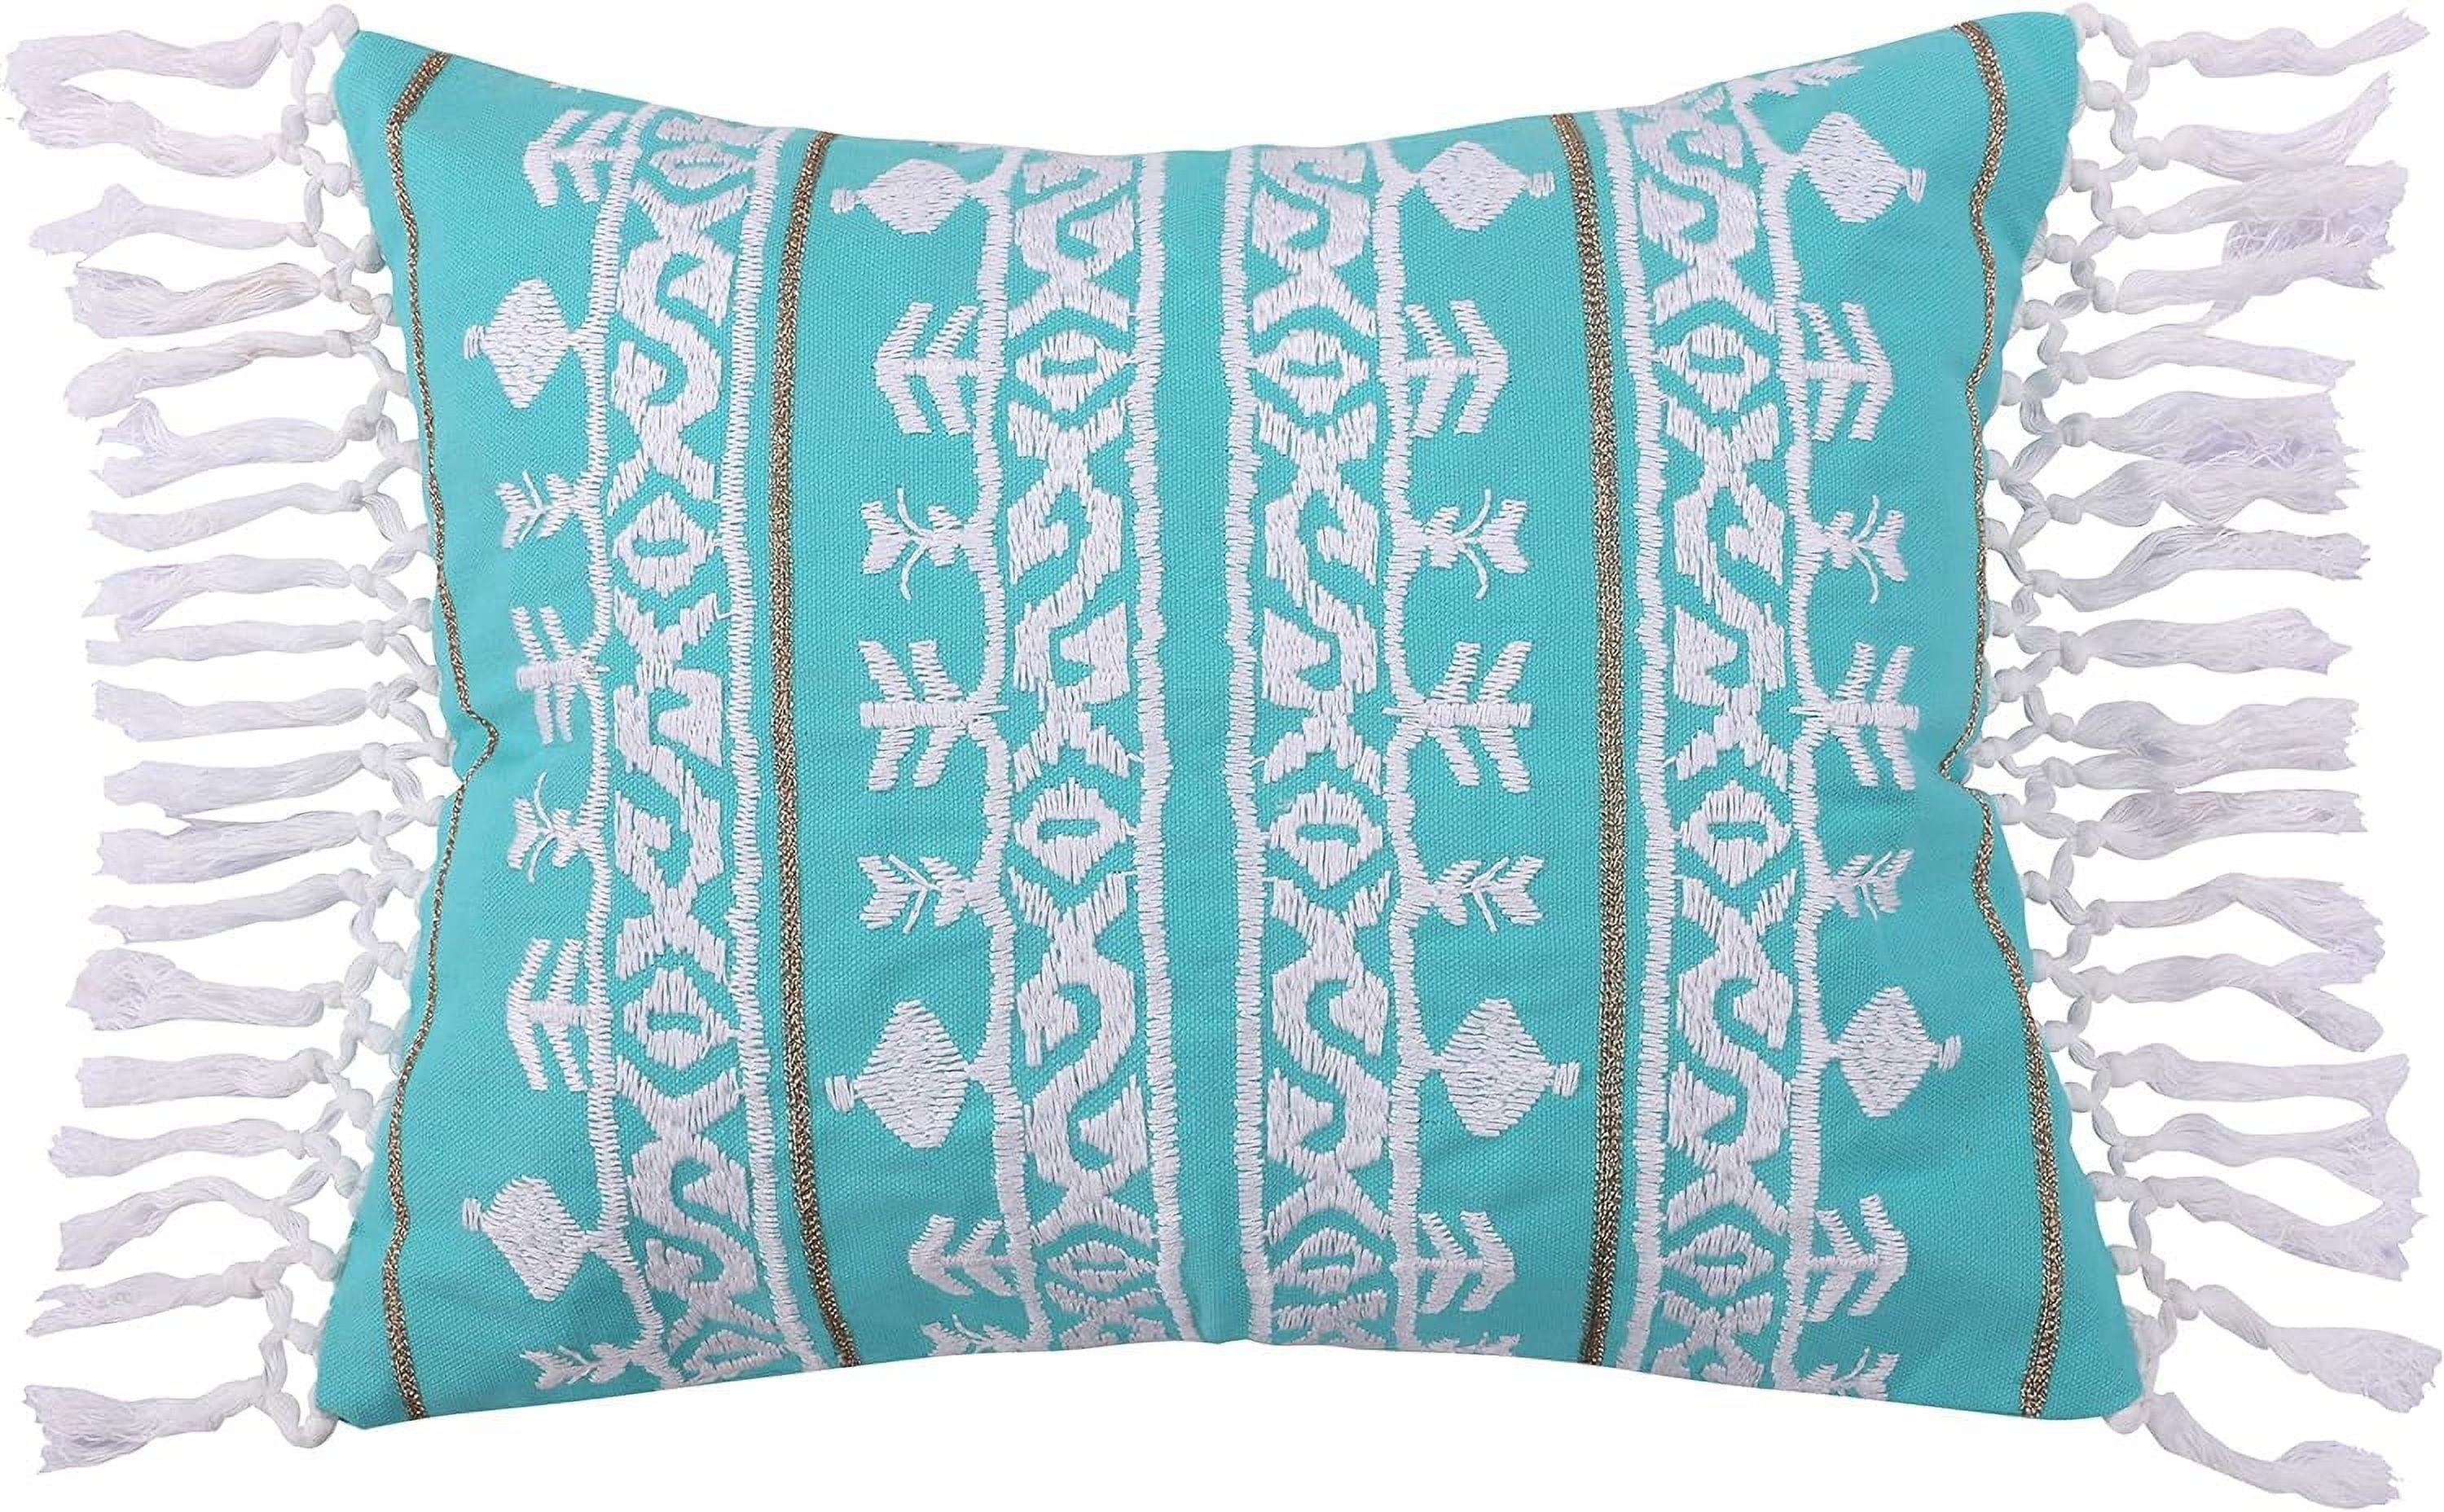 Teal and White Embroidered Cotton Rectangular Pillow